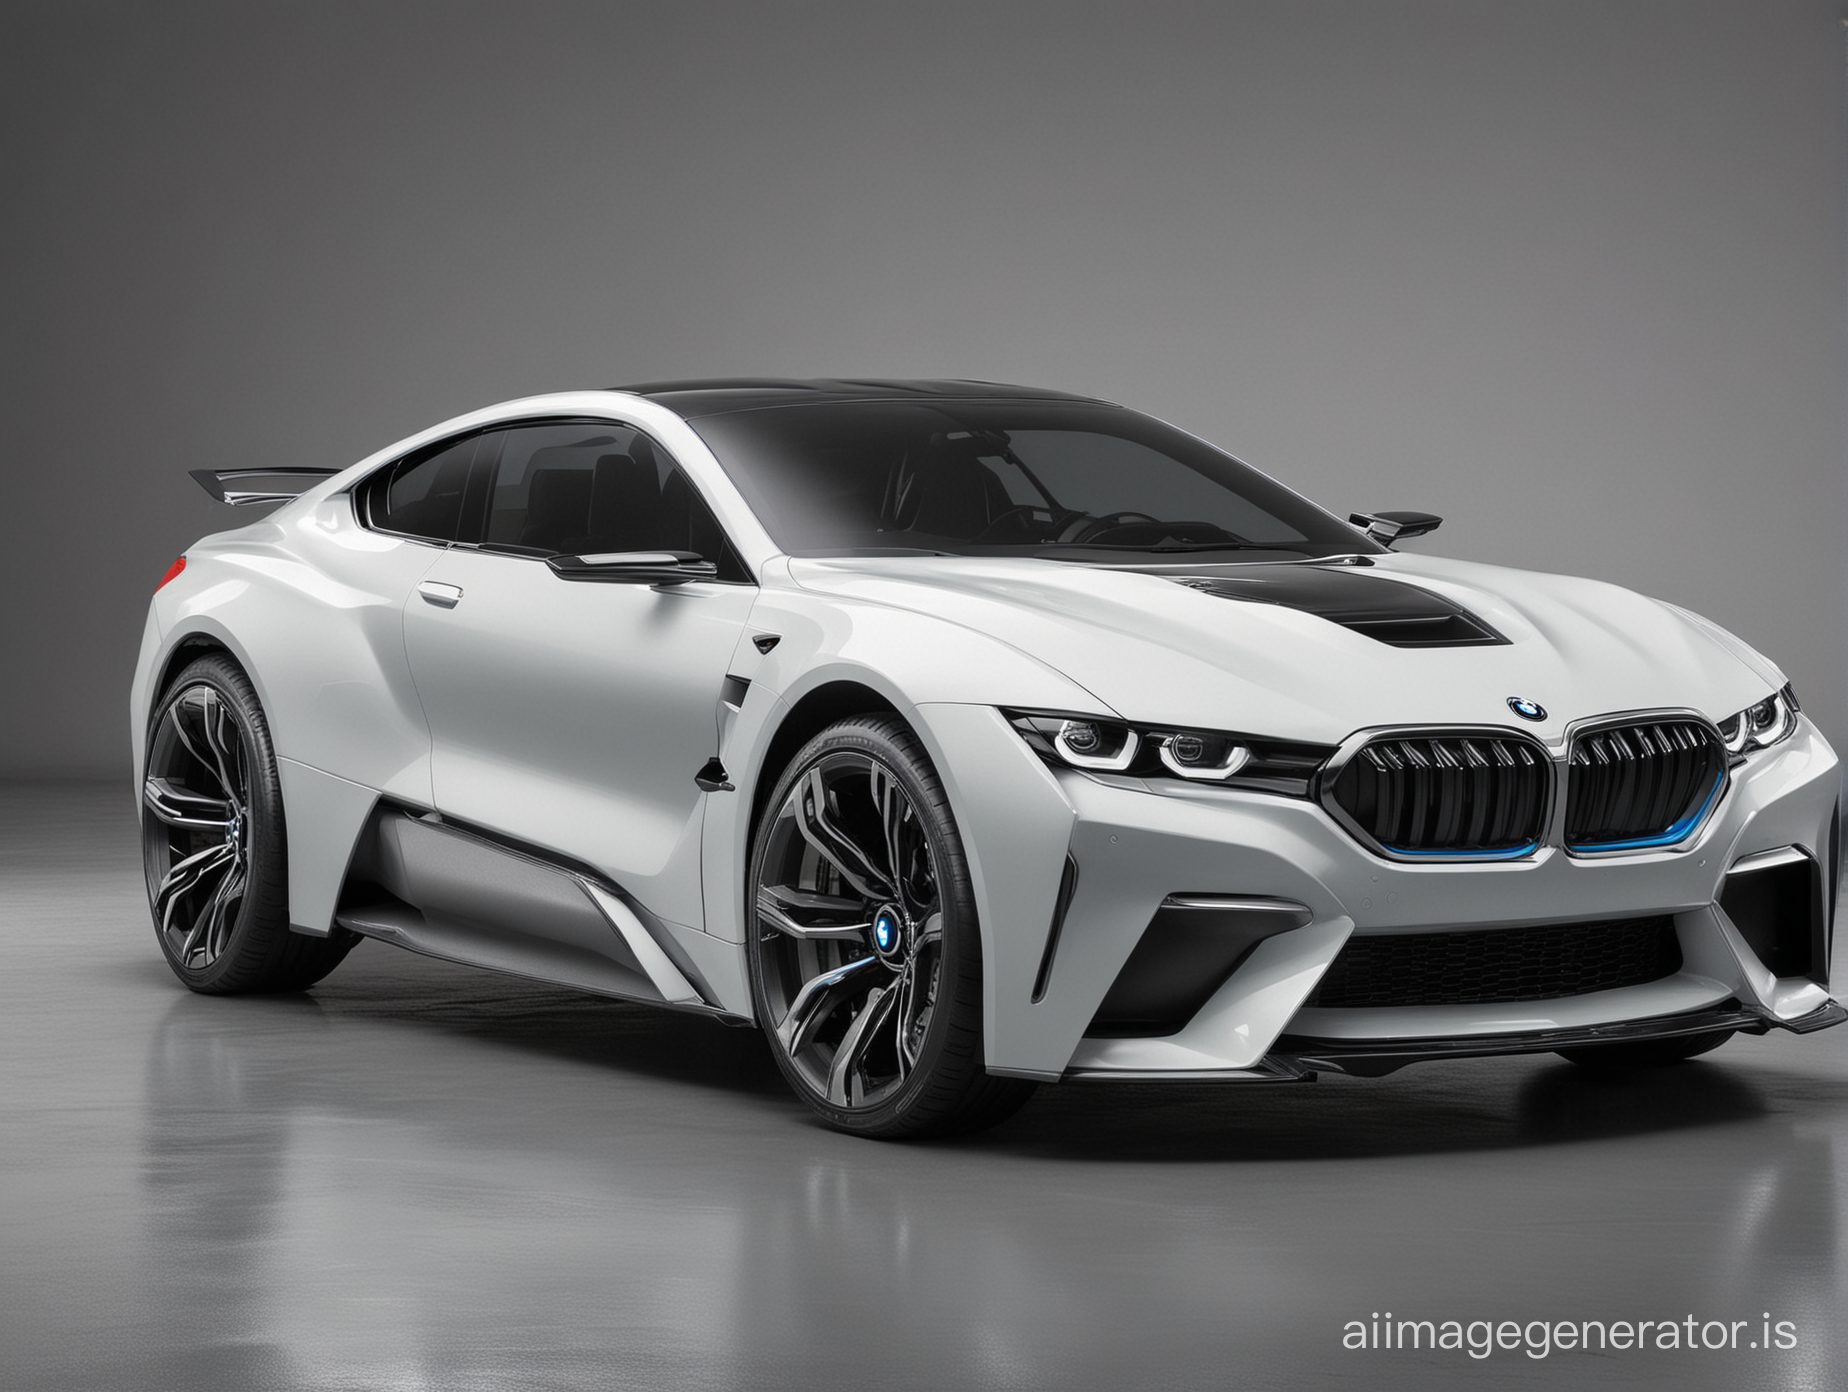 Create an original BMW concept in the year 2100. Use design elements from the BMW M3 from all years, M4, 7 series, M8. Don't base it on the i8. noon